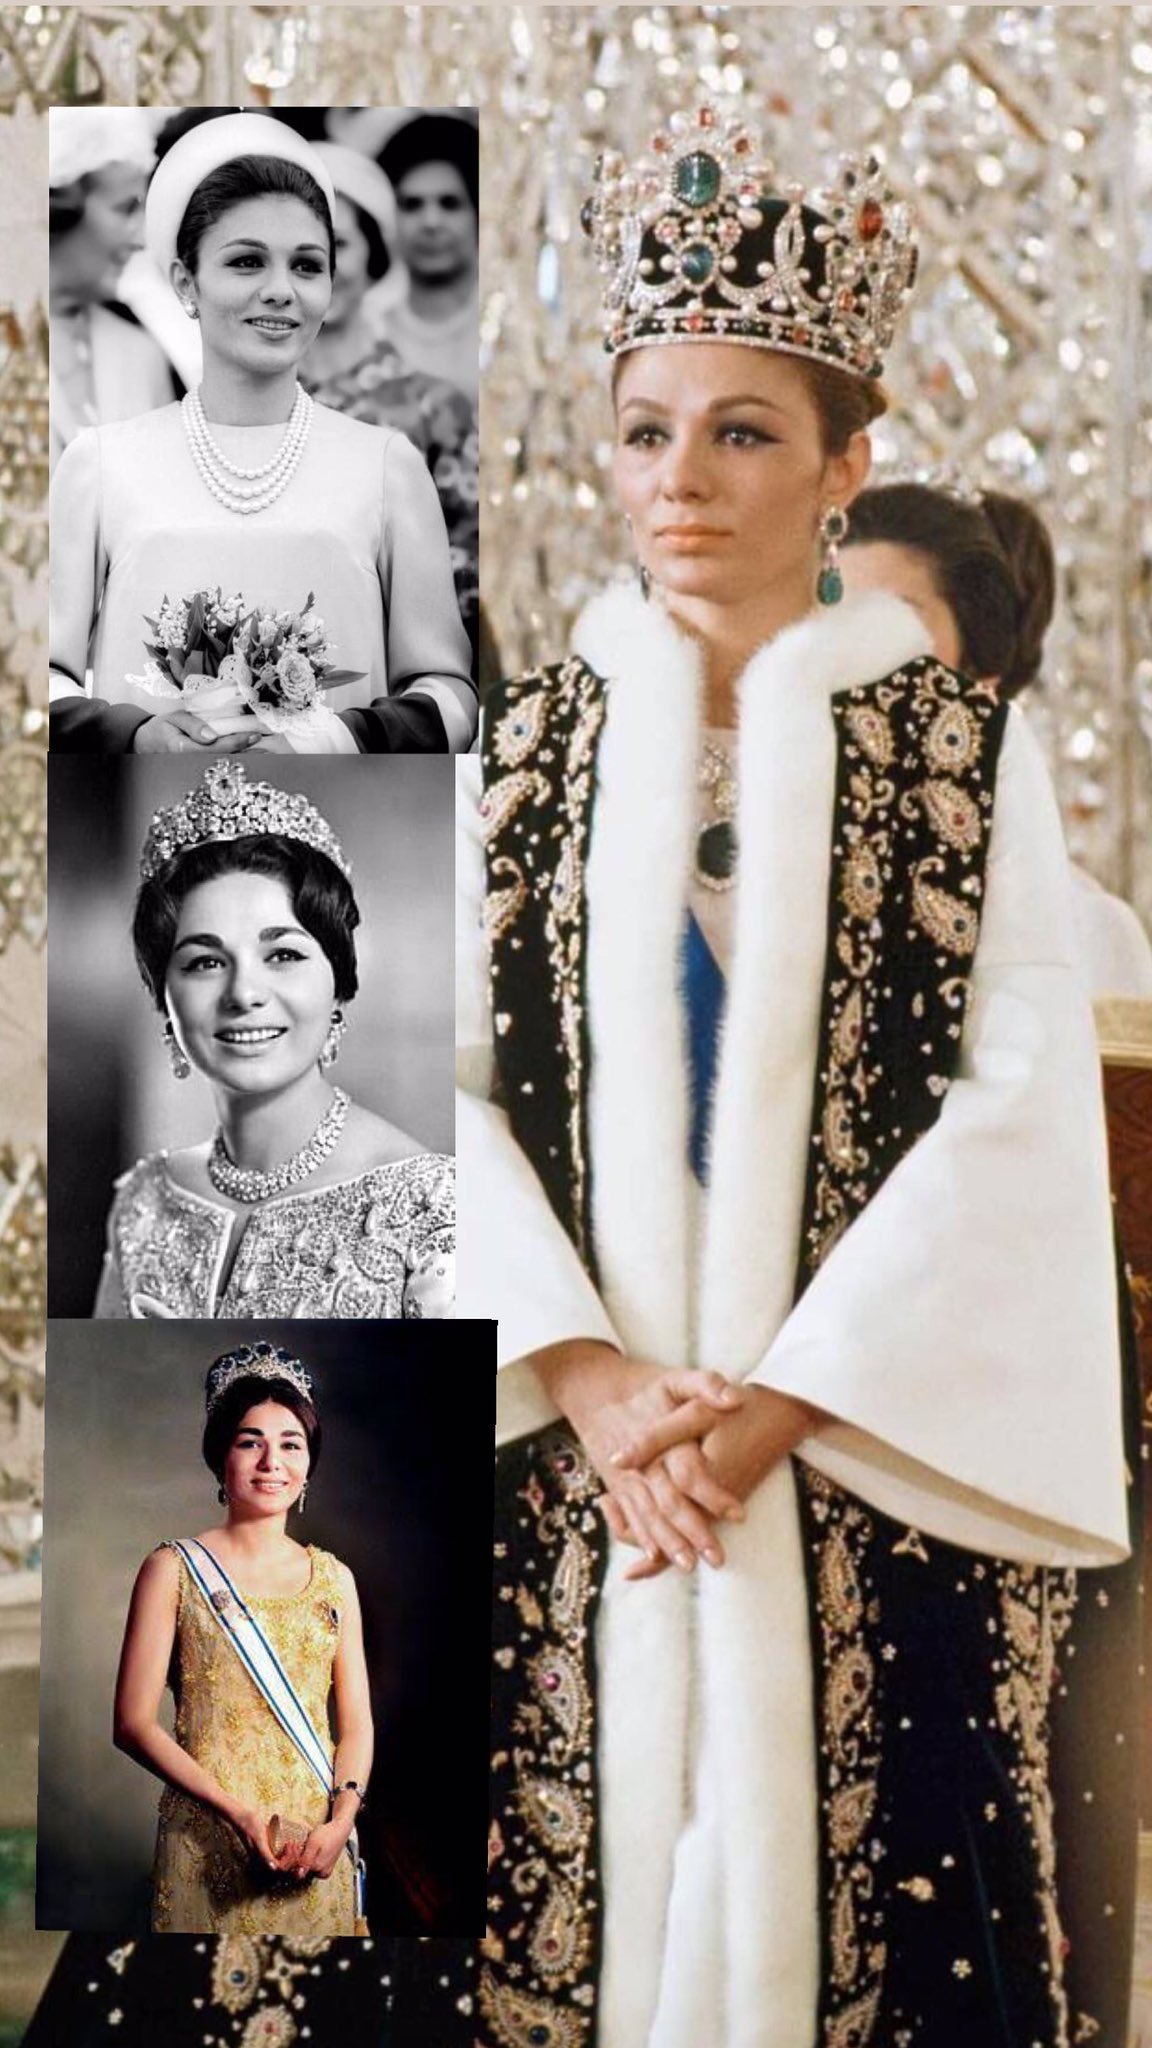 A very Happy birthday to Her Majesty Queen Farah Pahlavi
(mother of my homeland)
We all love you    